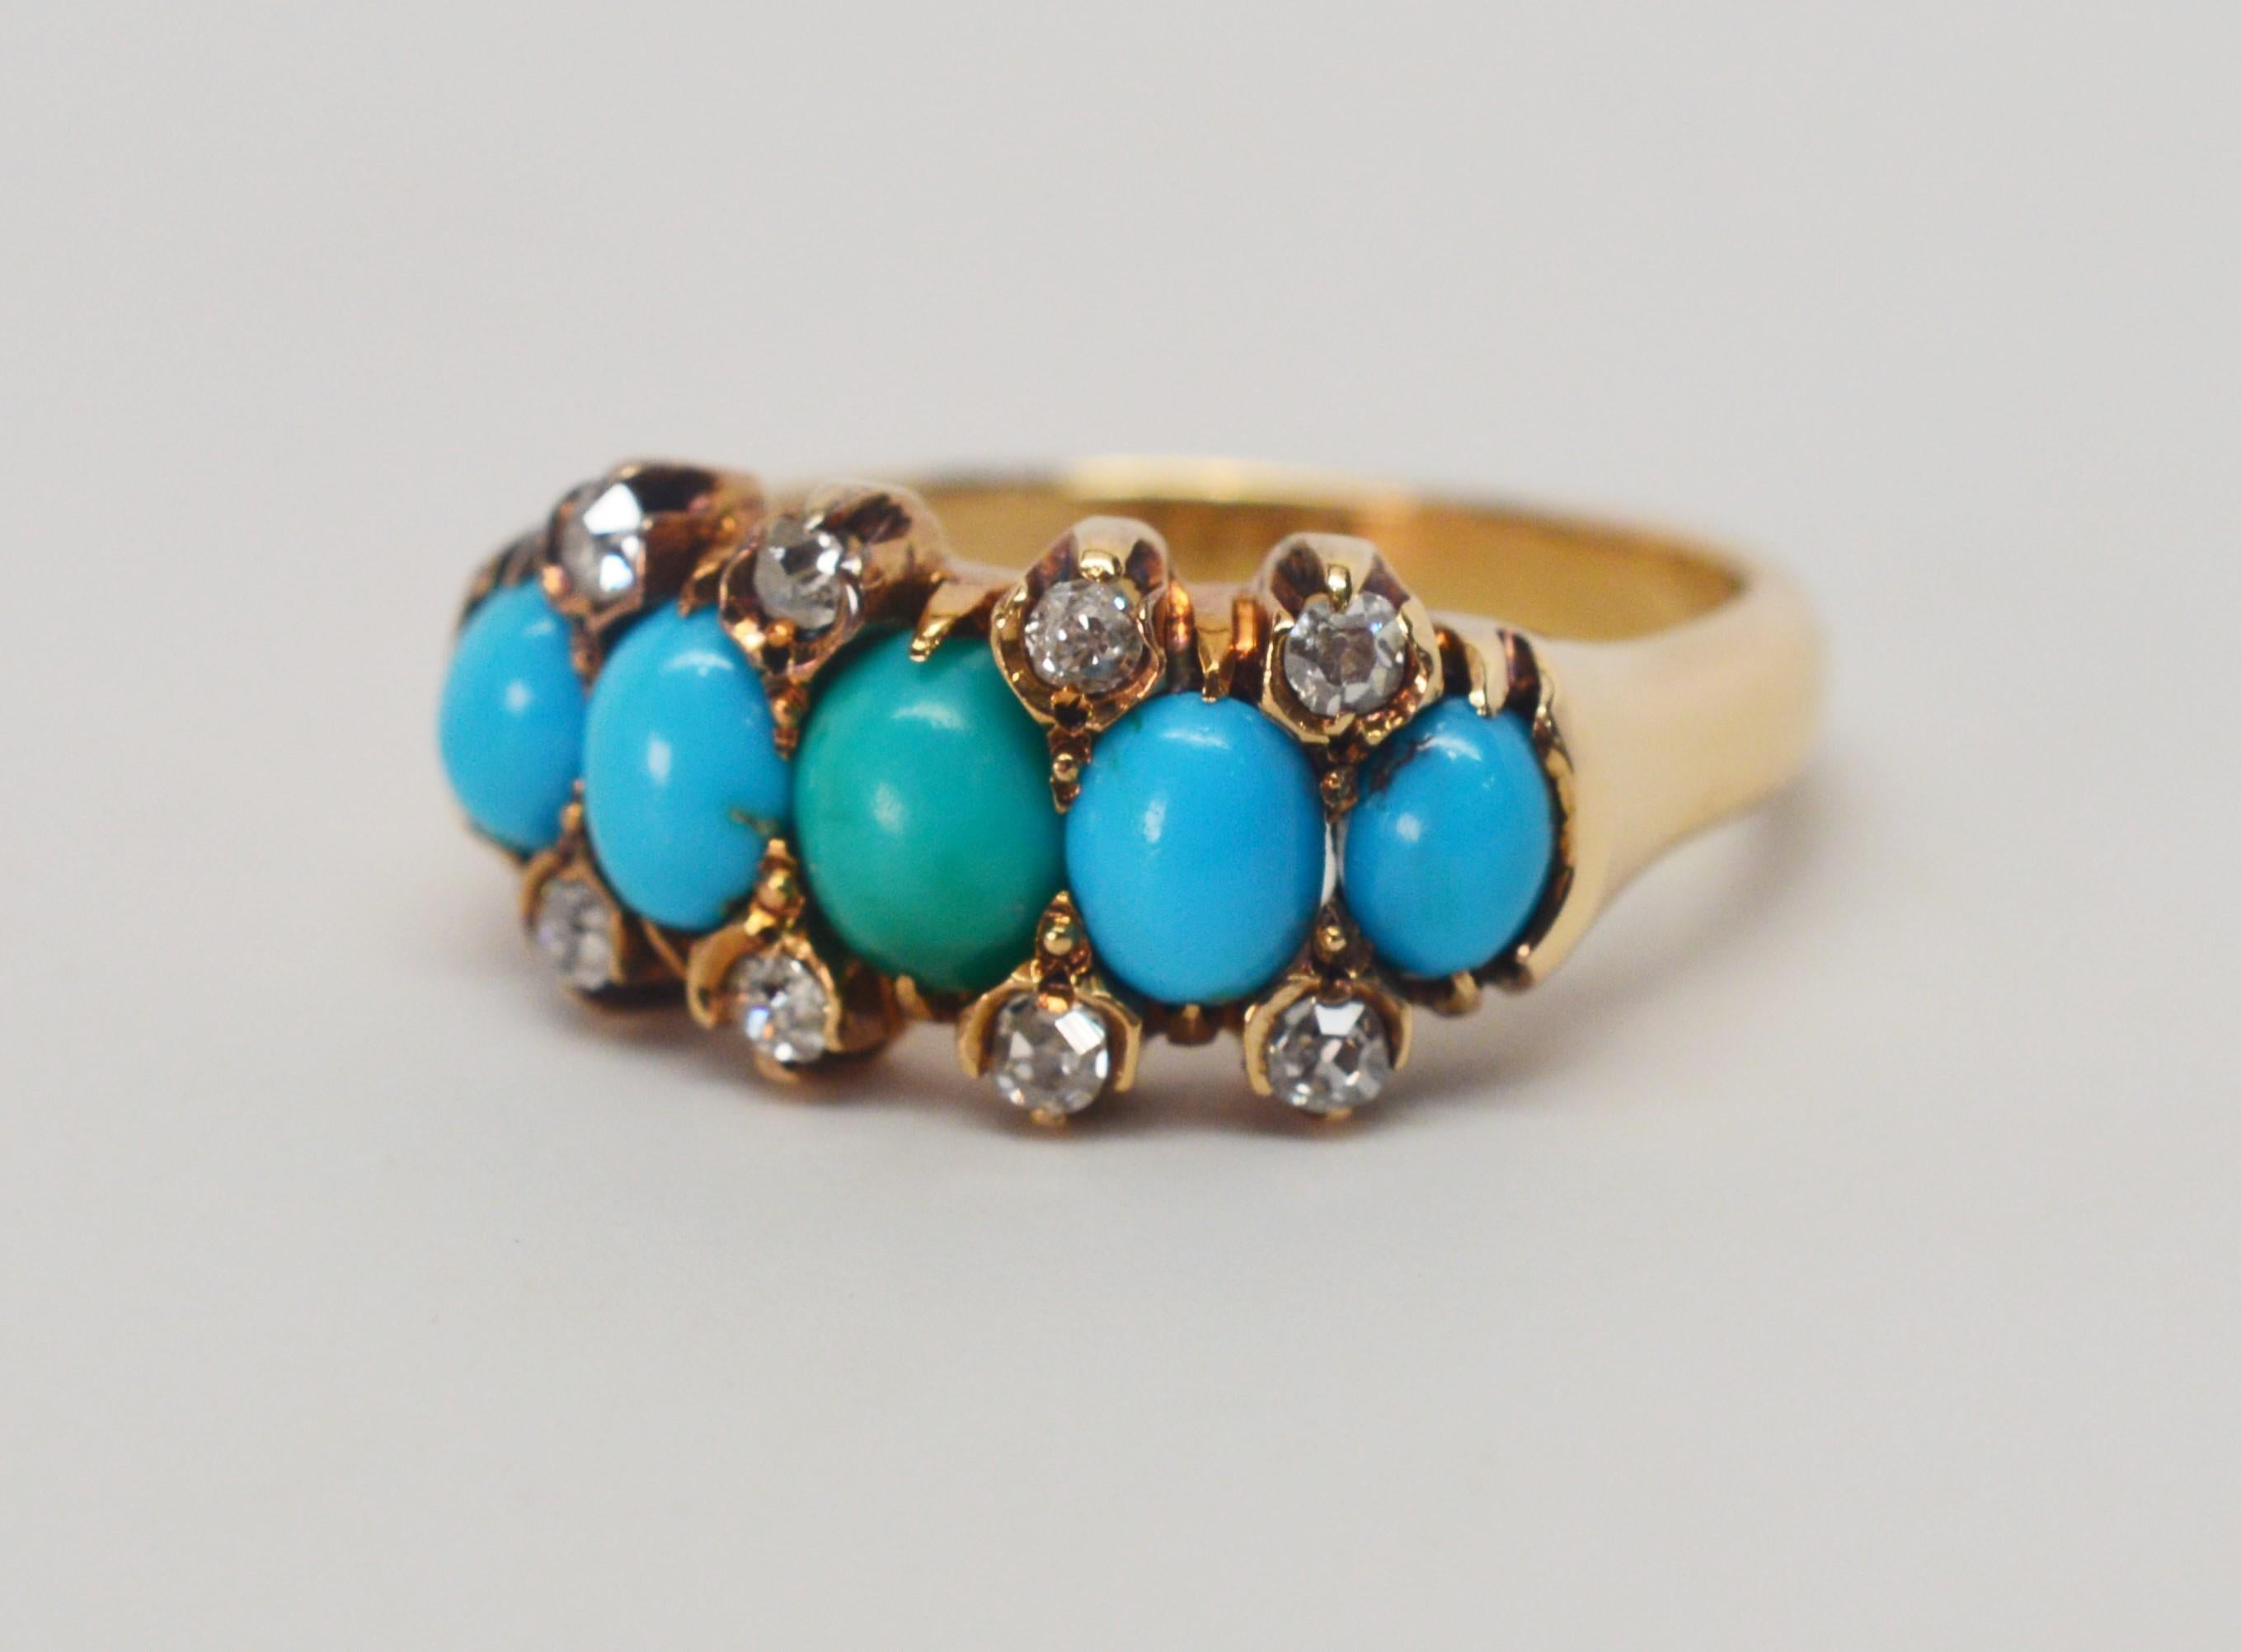 Five oval cut blue green natural turquoise stones accented by eight rose cut diamonds crown this simple fourteen carat antique gold band.
Natural stones with some veining, the center stone is of green turquoise and the side stones are complimenting